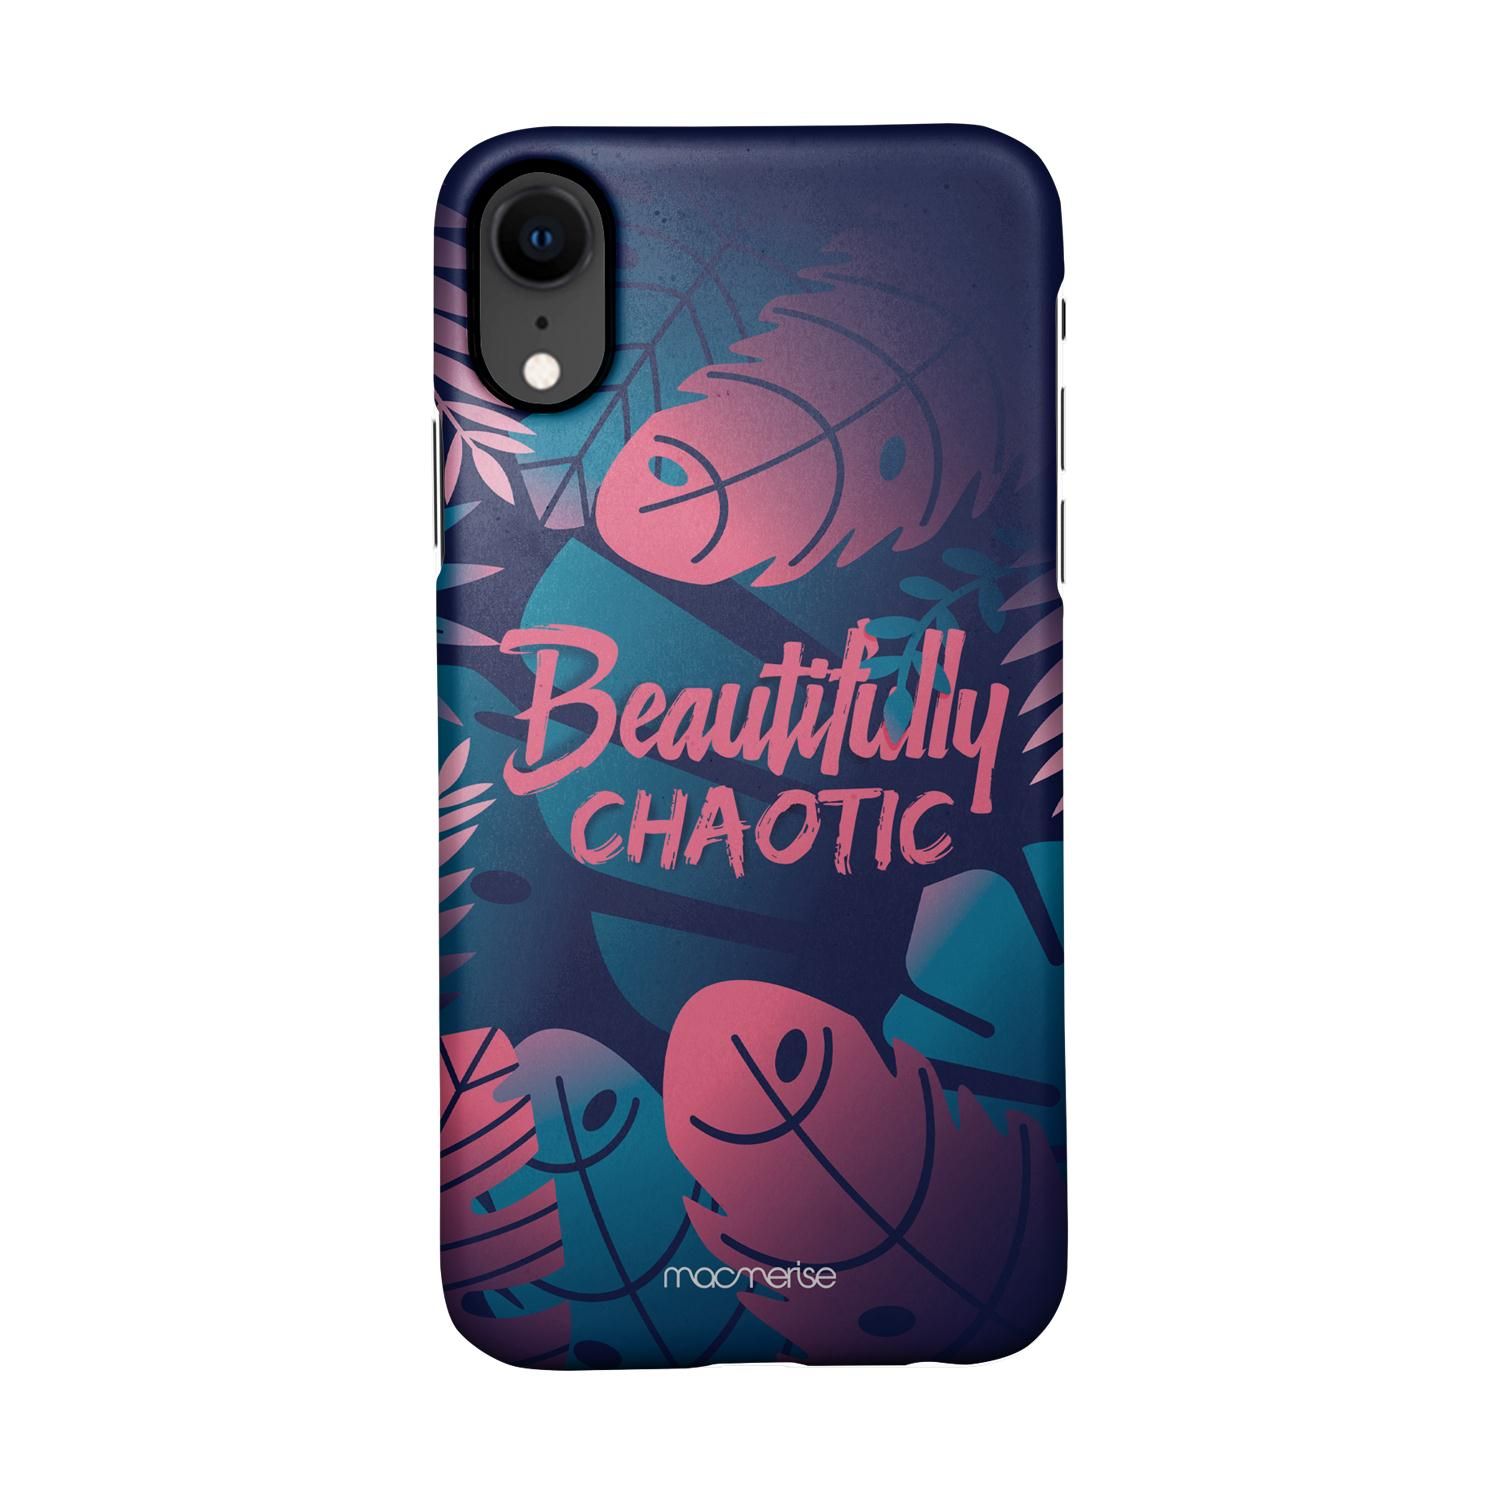 Buy Beautifully Chaotic - Sleek Phone Case for iPhone XR Online